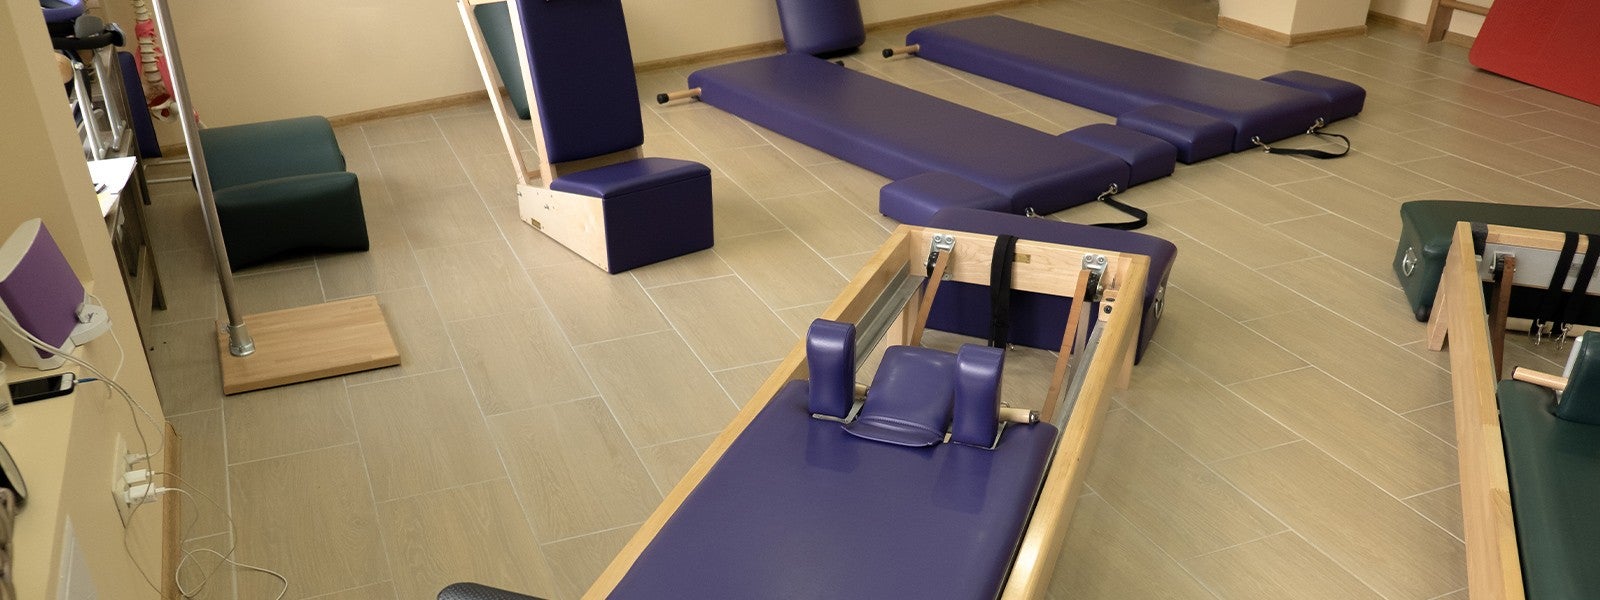 Pilates Mat Vs Pilates Reformer, What's the Difference?